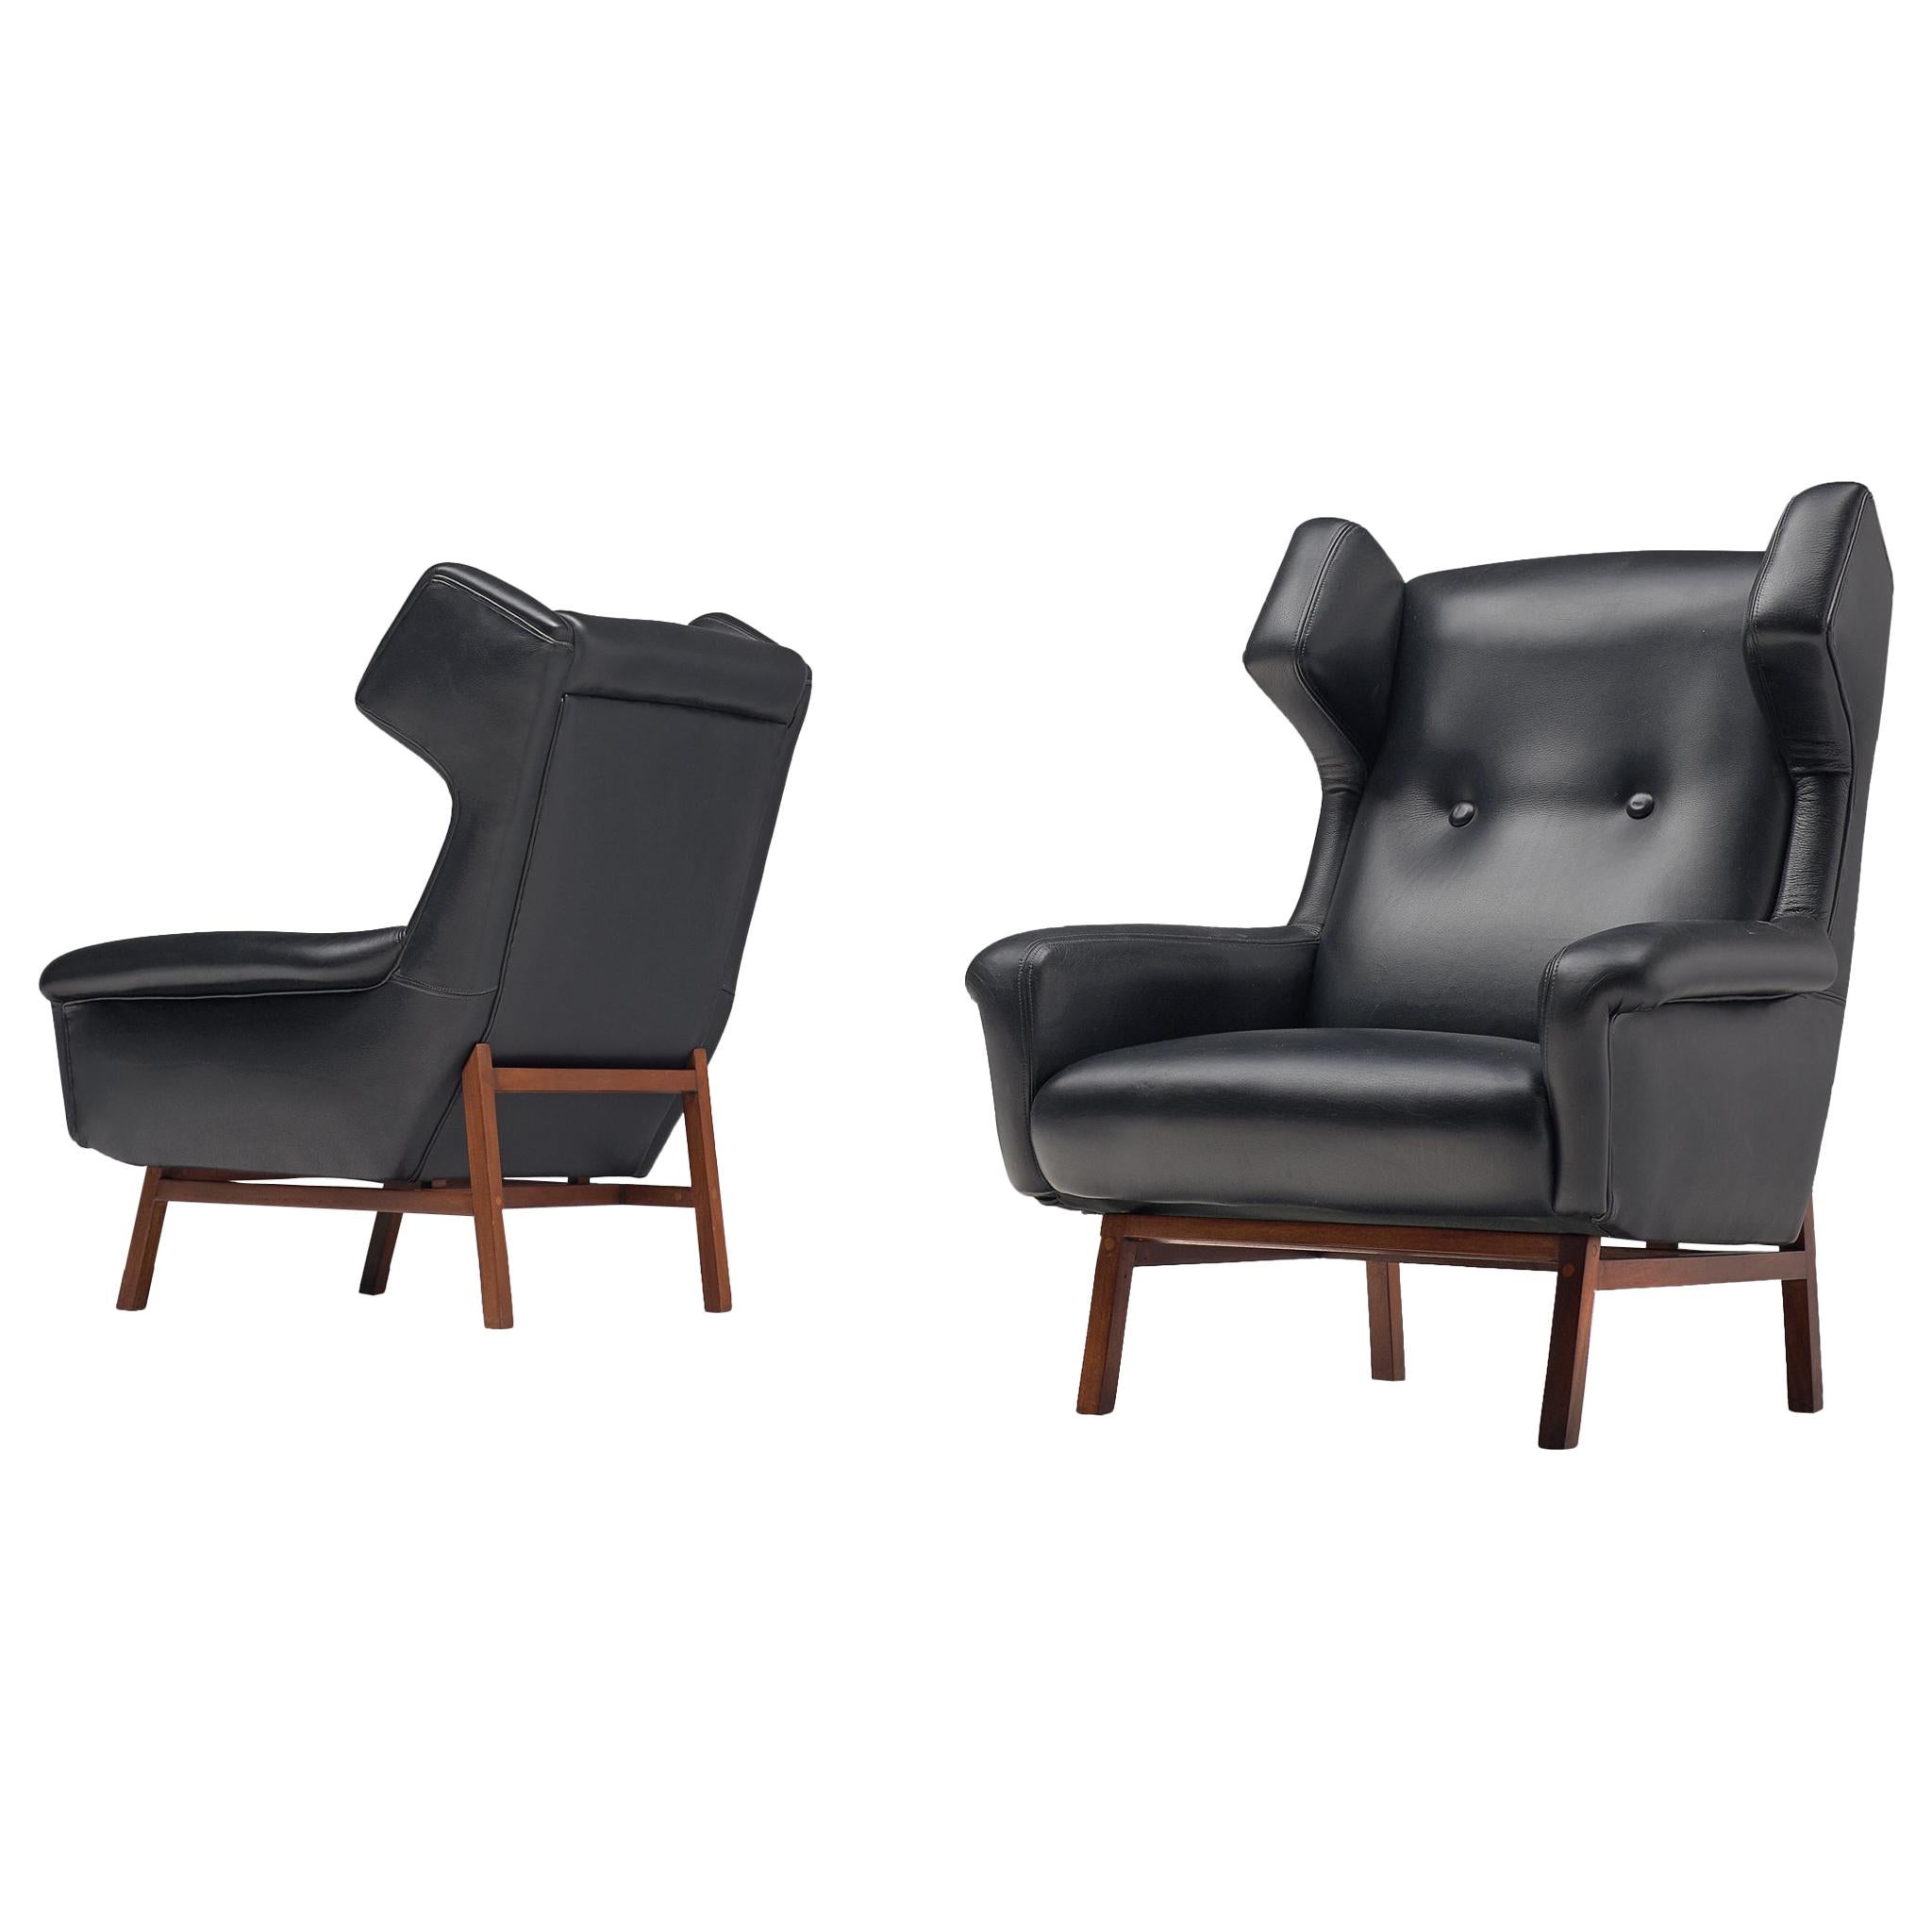 Pair of Italian Black Leather Wingback Chairs